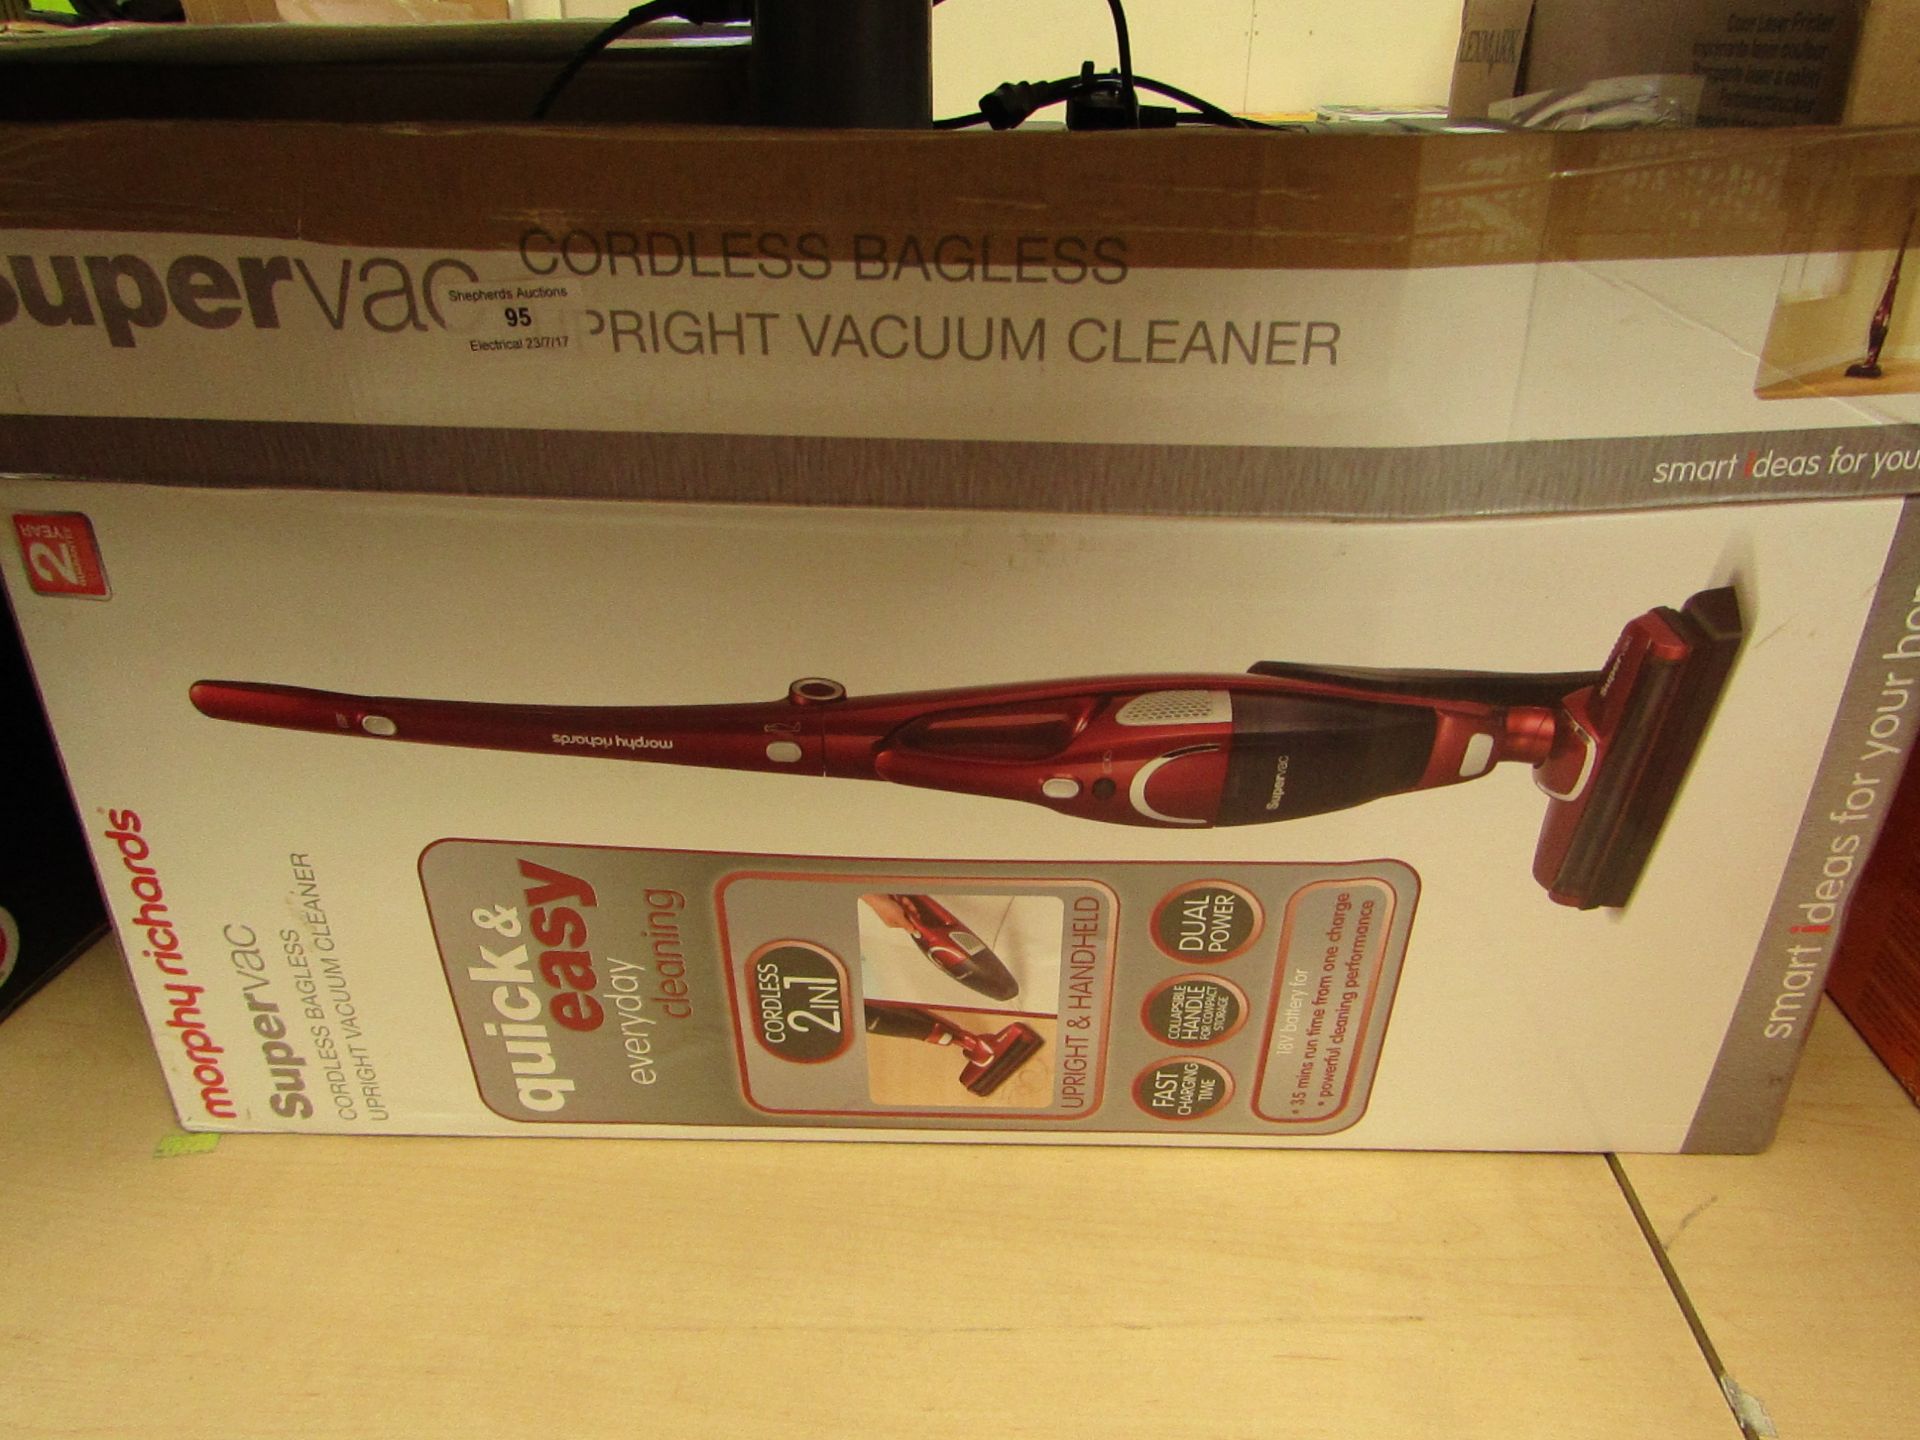 Morphy Richards SuperVac. Tested working & boxed.